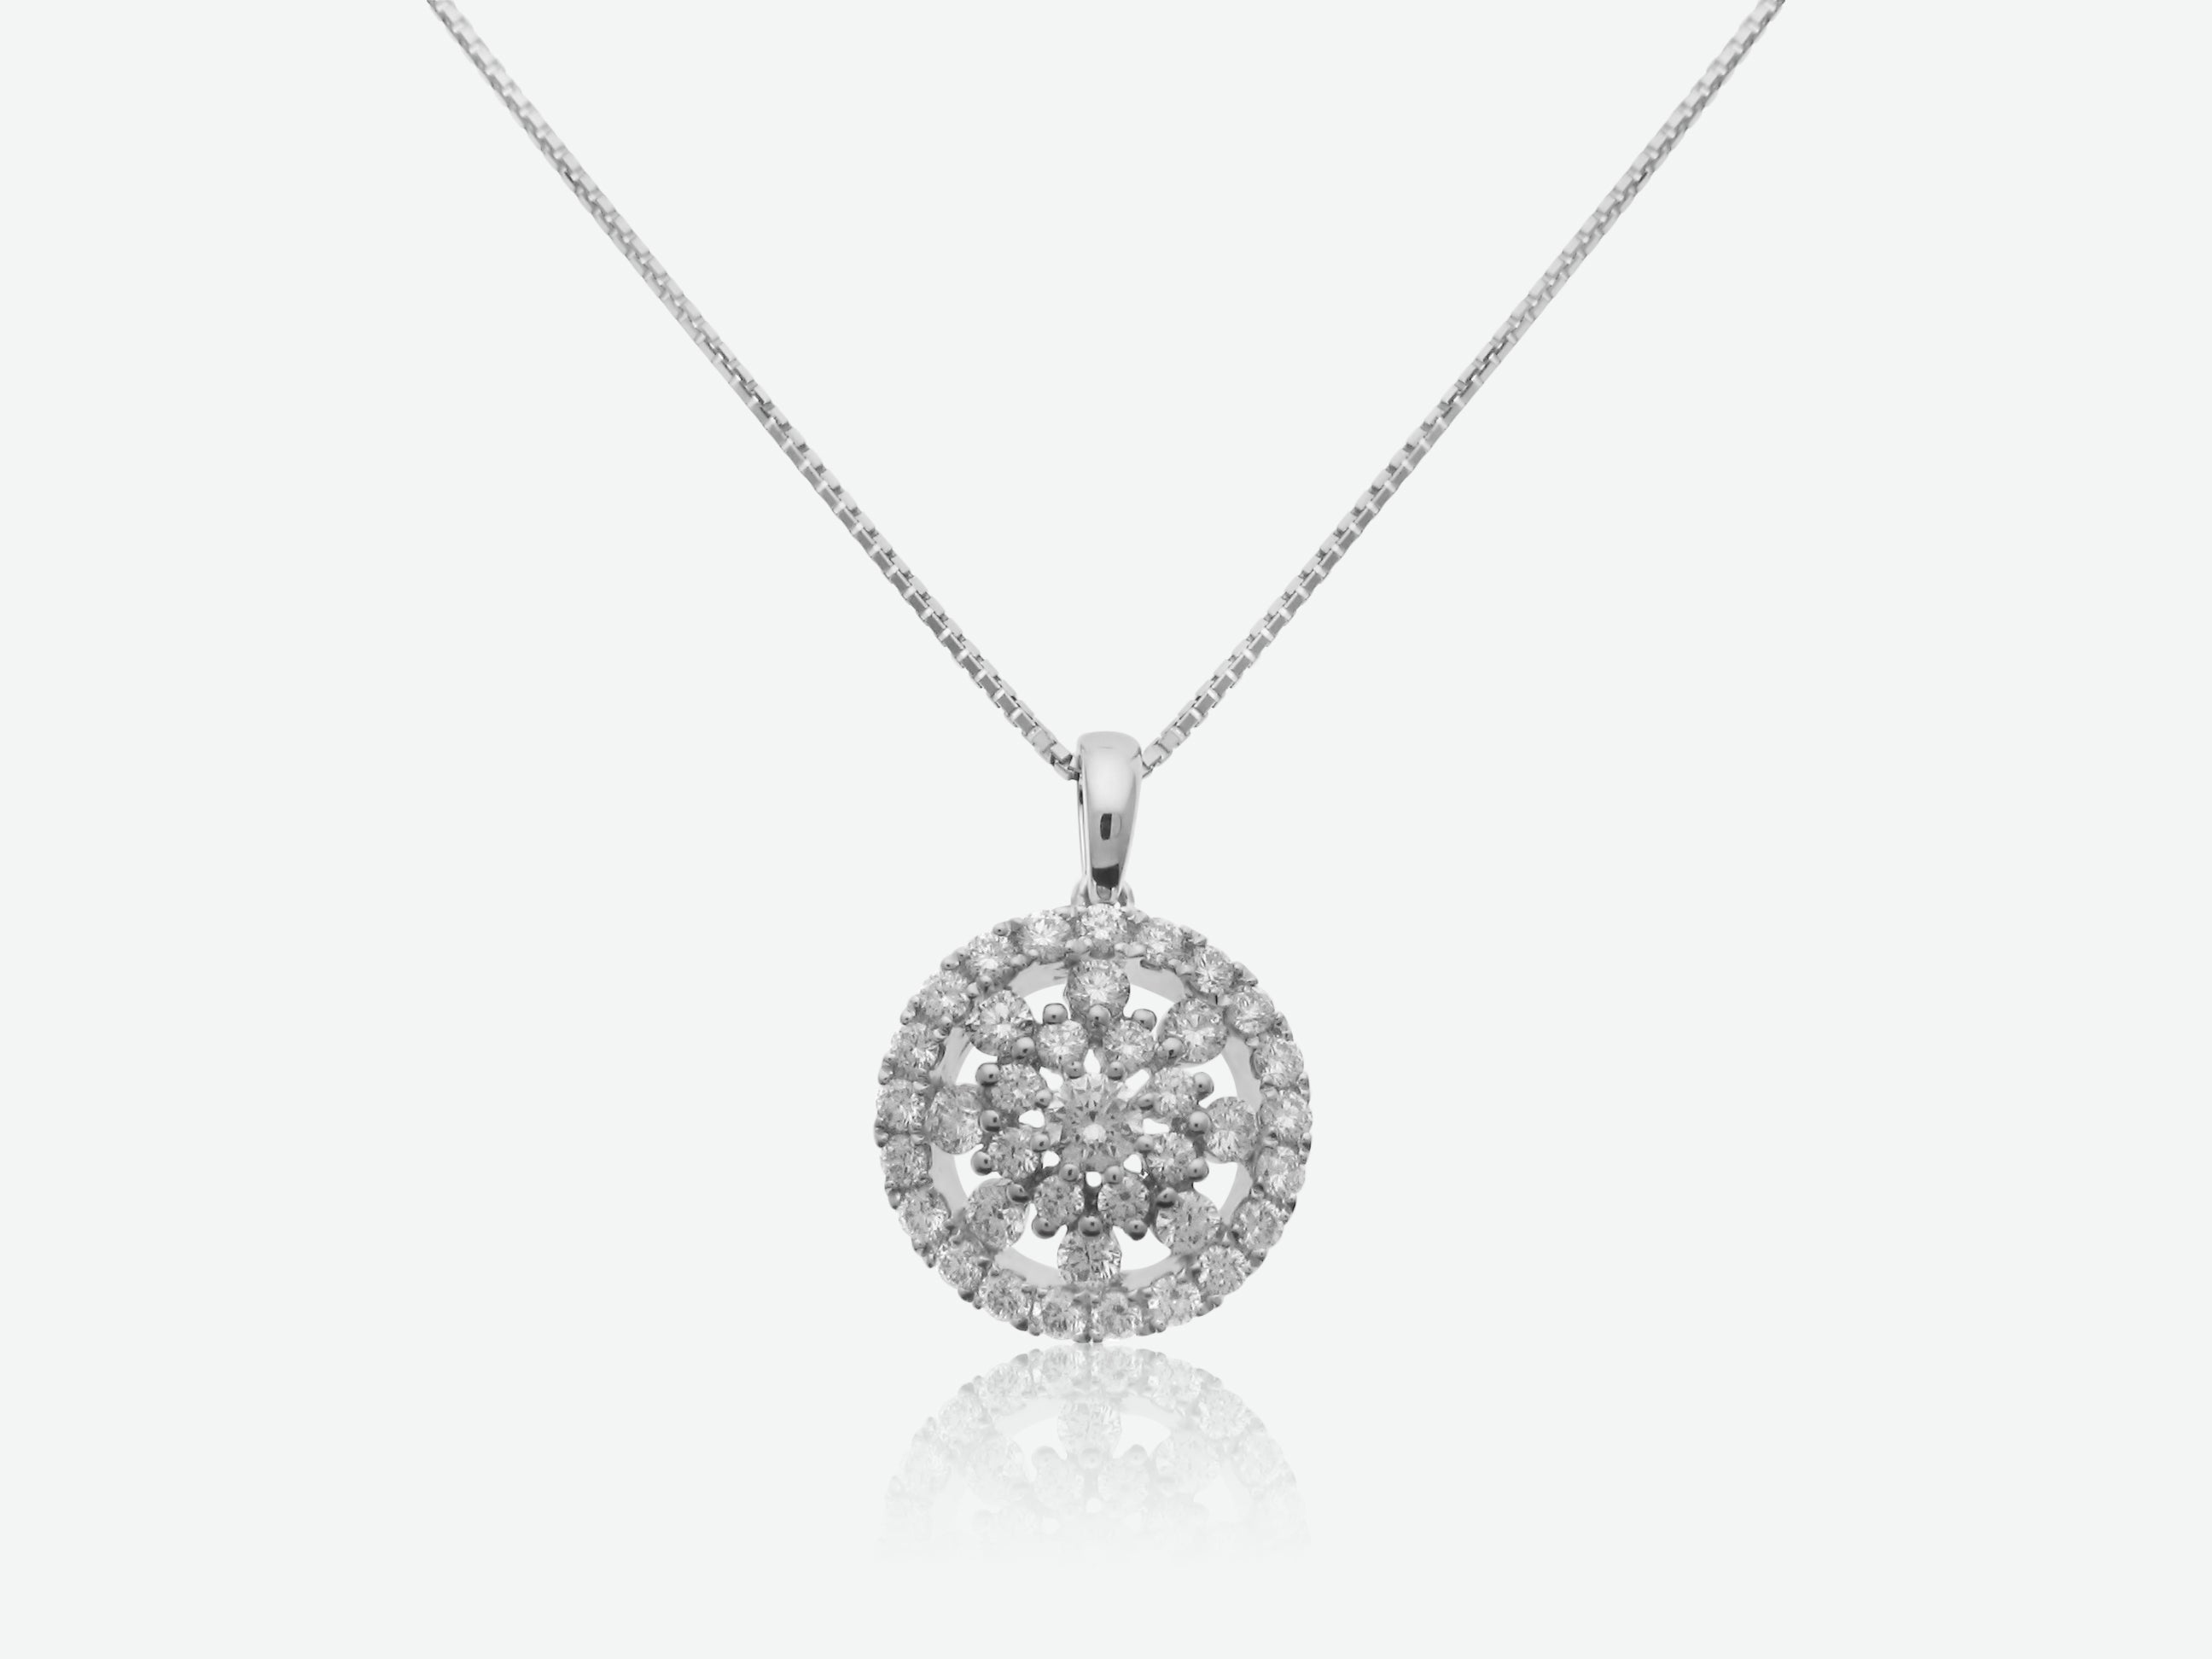 MEMOIRE 18K WHITE GOLD 0.80CT SI/G DIAMOND PENDANT FROM THE GLITTER COLLECTION